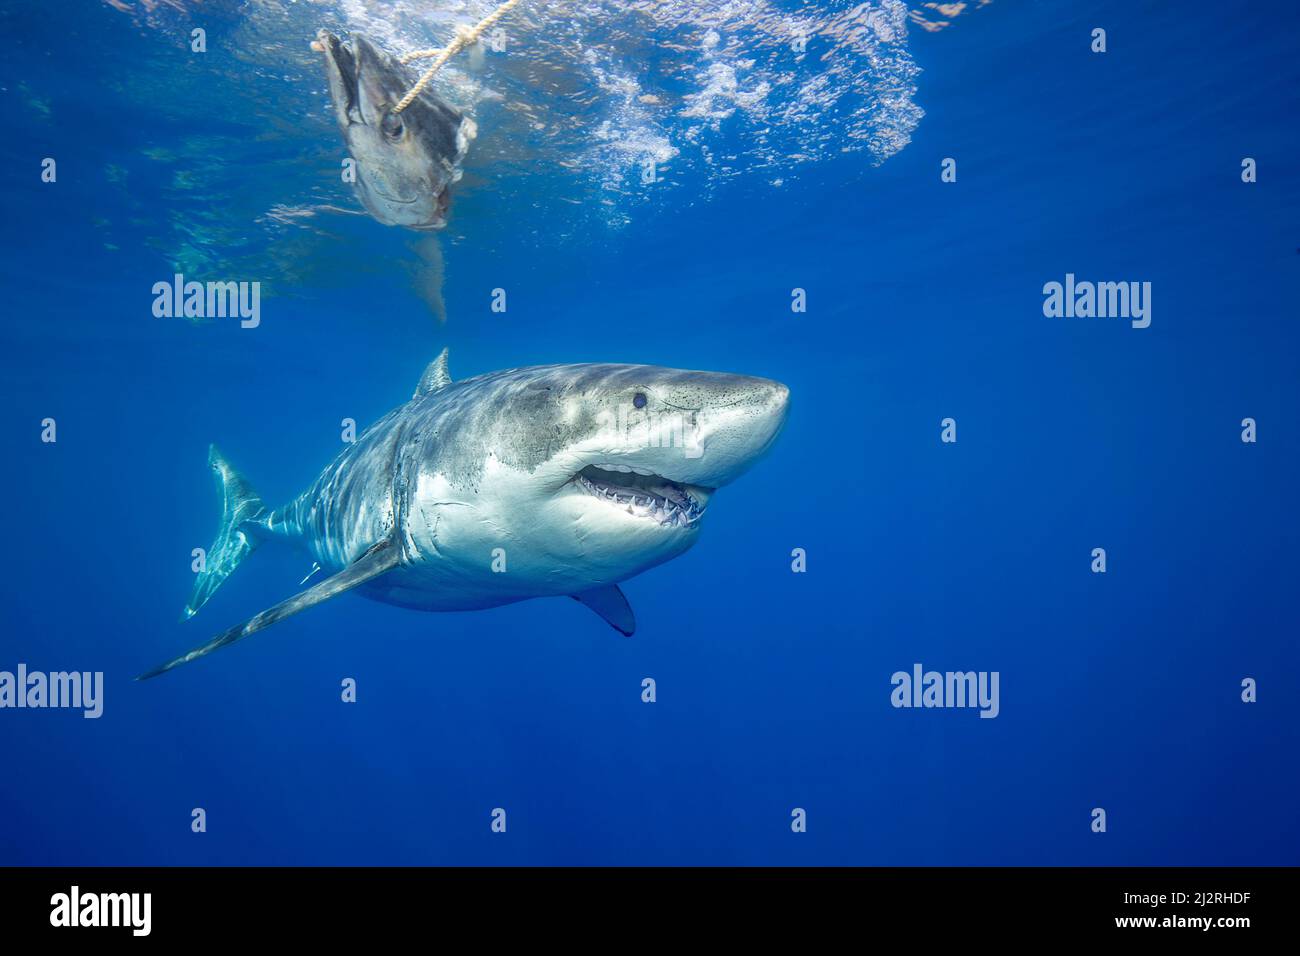 The head of a wahoo is used to attract this great white shark, Carcharodon carcharias, photographed off Guadalupe Island, Mexico. Stock Photo